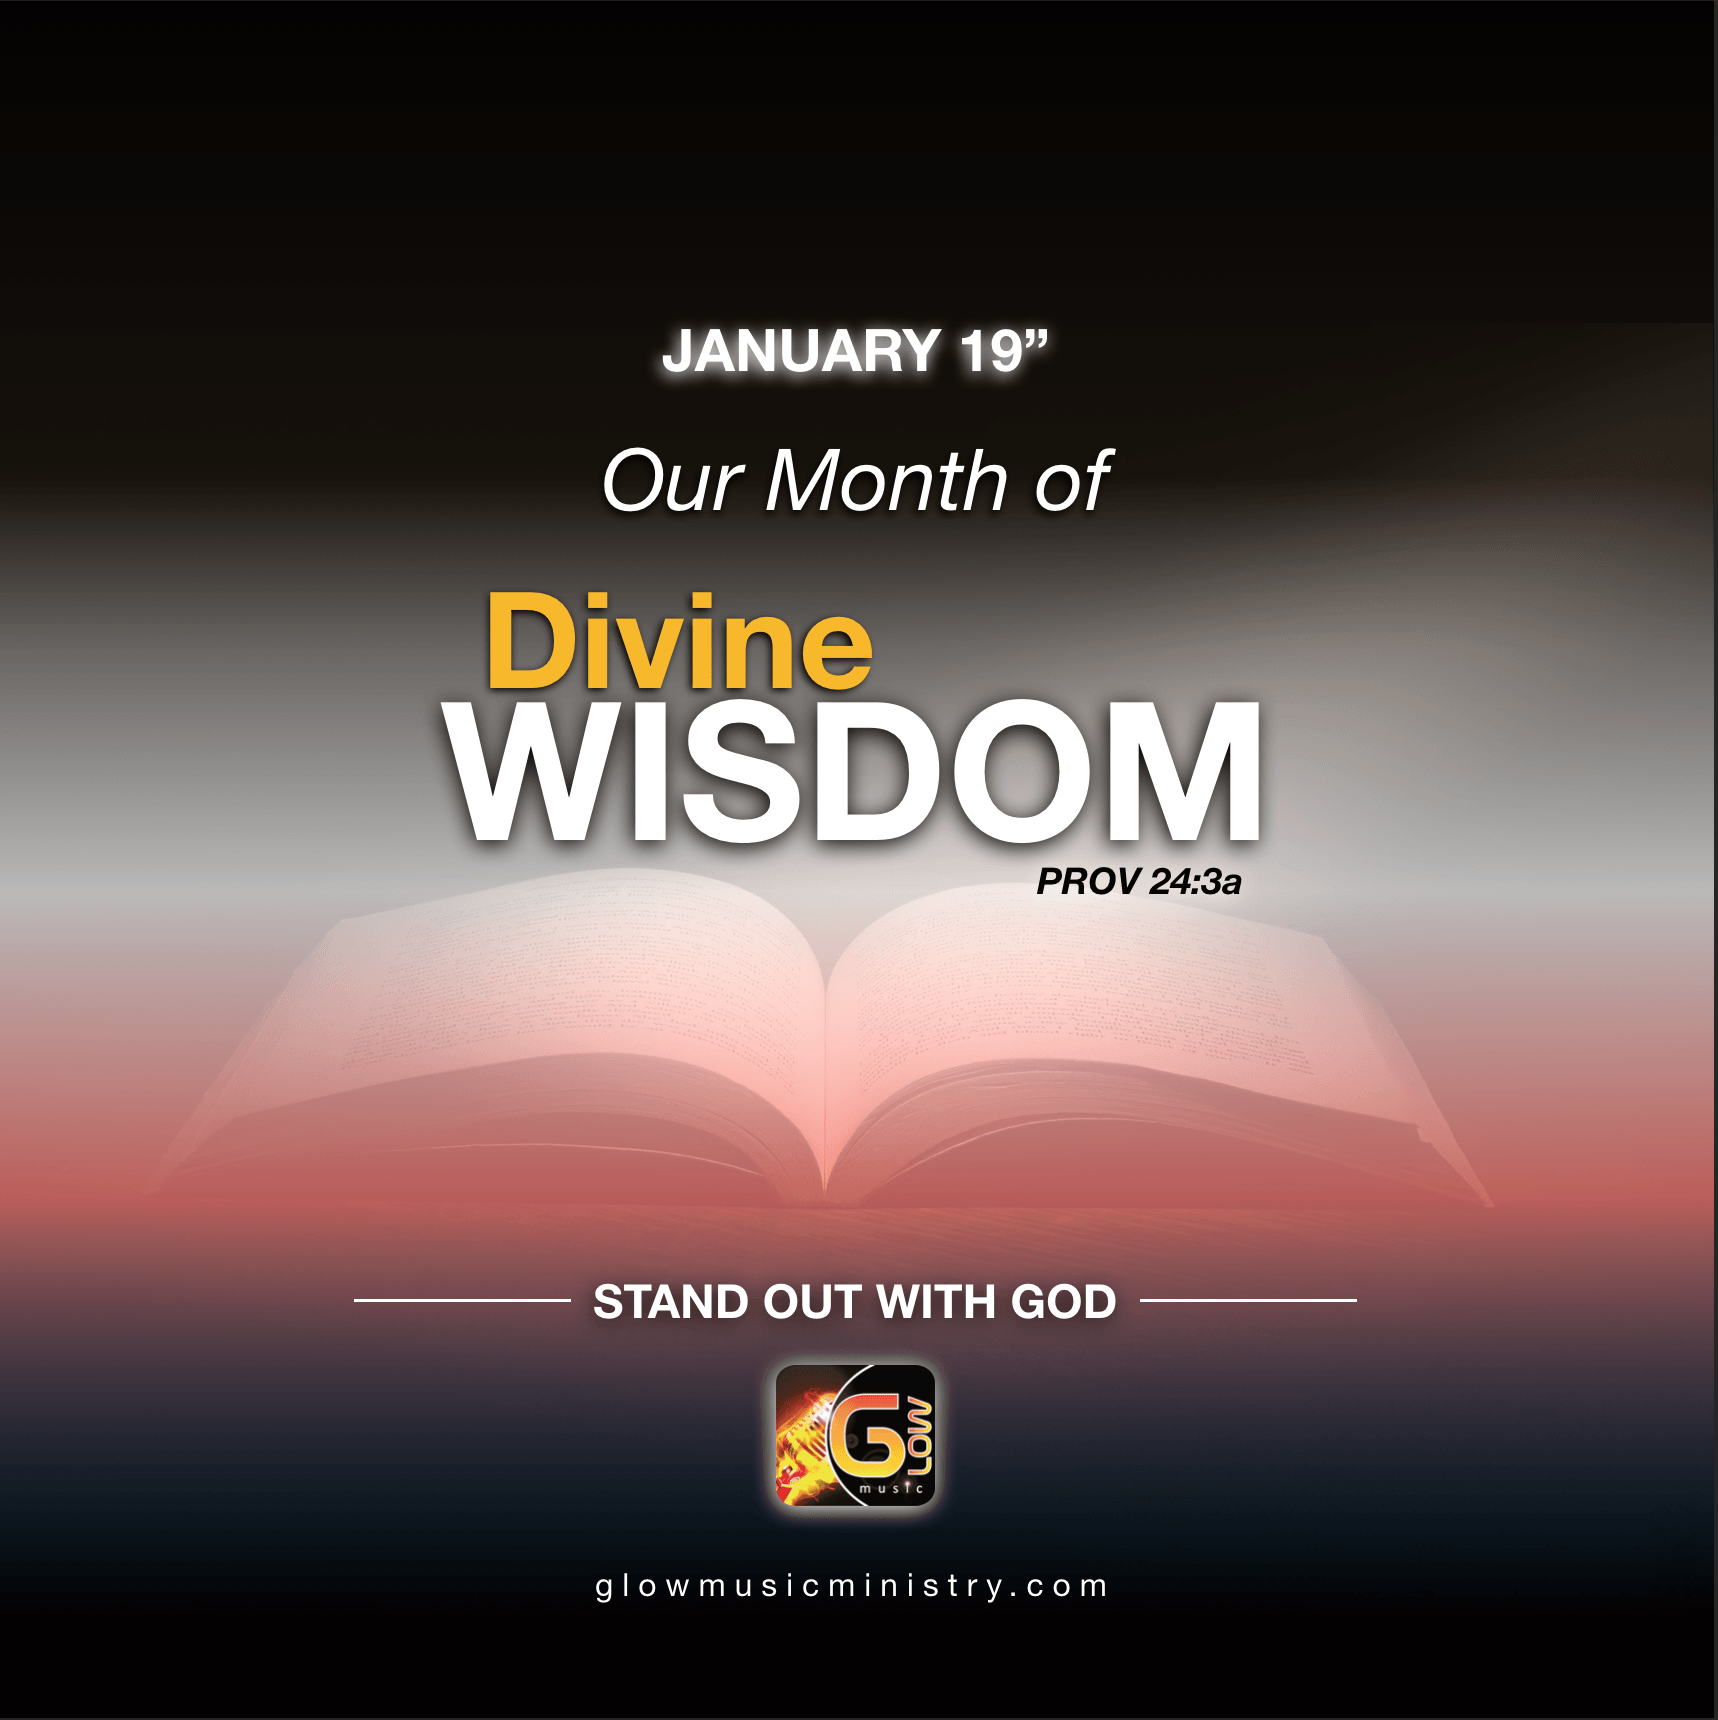 January 2019 - Month of Divine Wisdom at Glow Music Ministry Accra Ghana - best Gospel music production recording and management